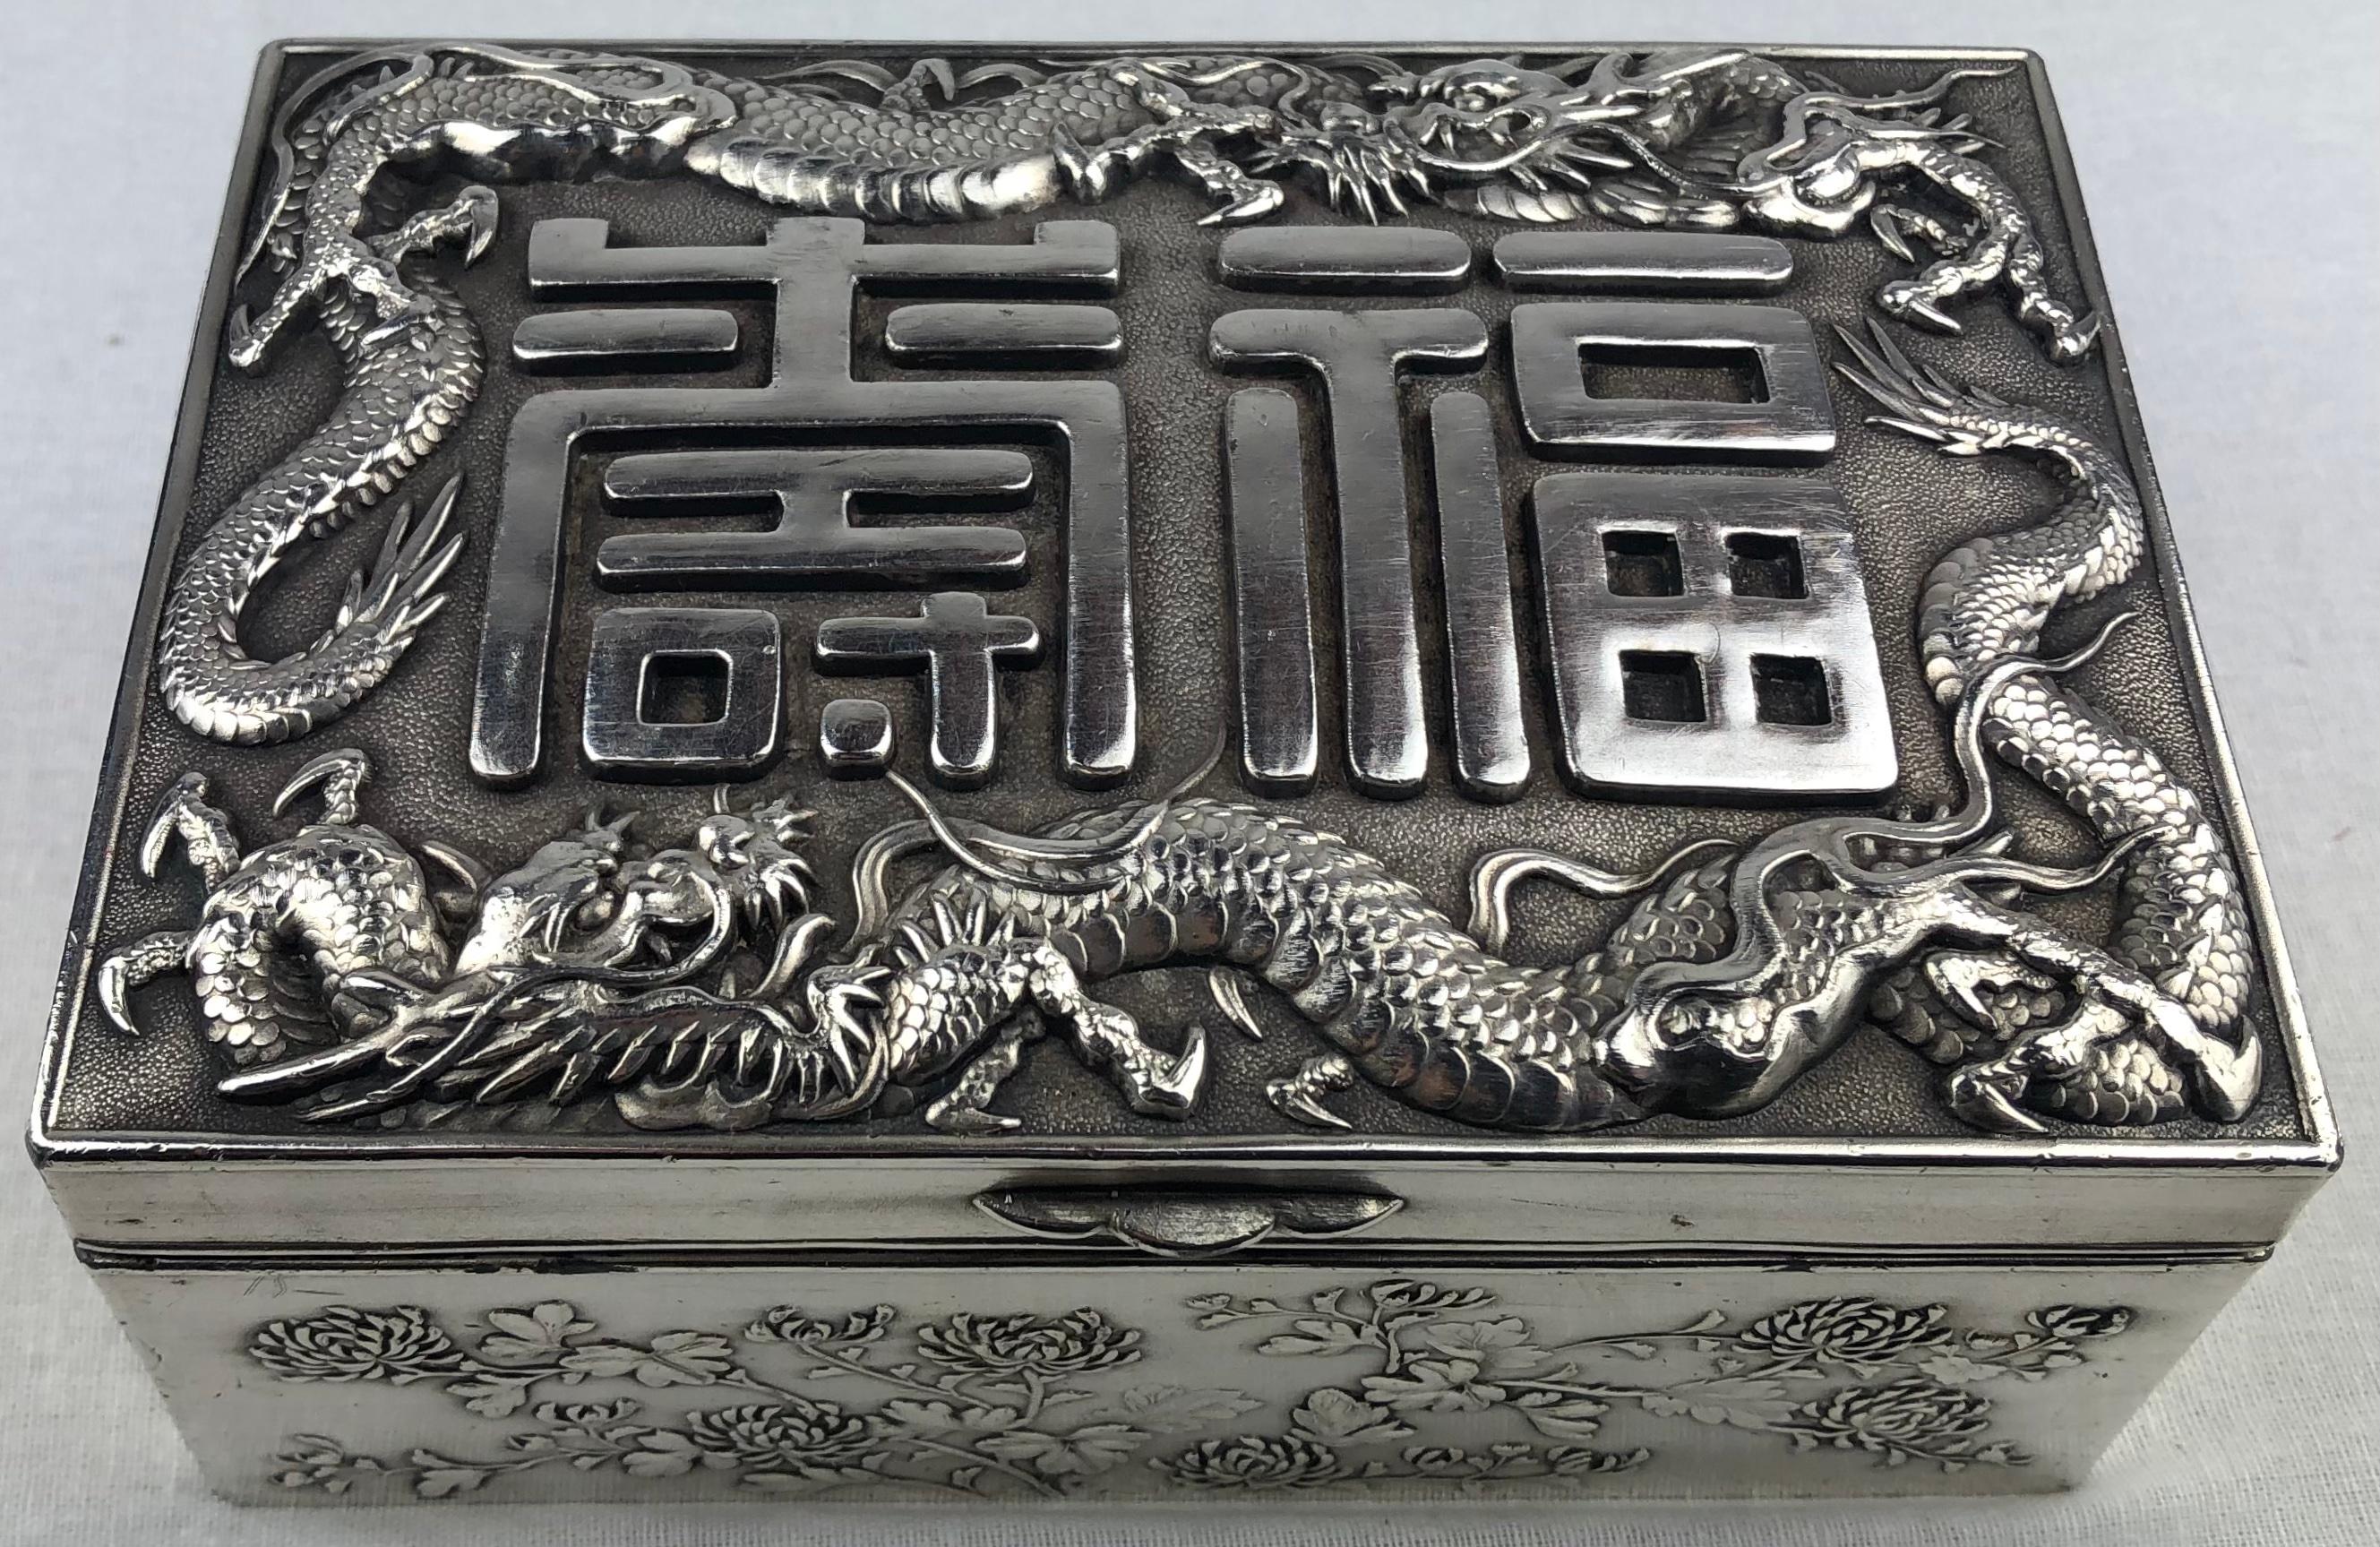 A stunning antique Japanese silver cigar, jewelry or keepsake box intricately designed and handcrafted, circa 1900s. 

Double skinned body, sides and lid are embossed in high-relief with water dragons and applied with flowing whiskers on hand